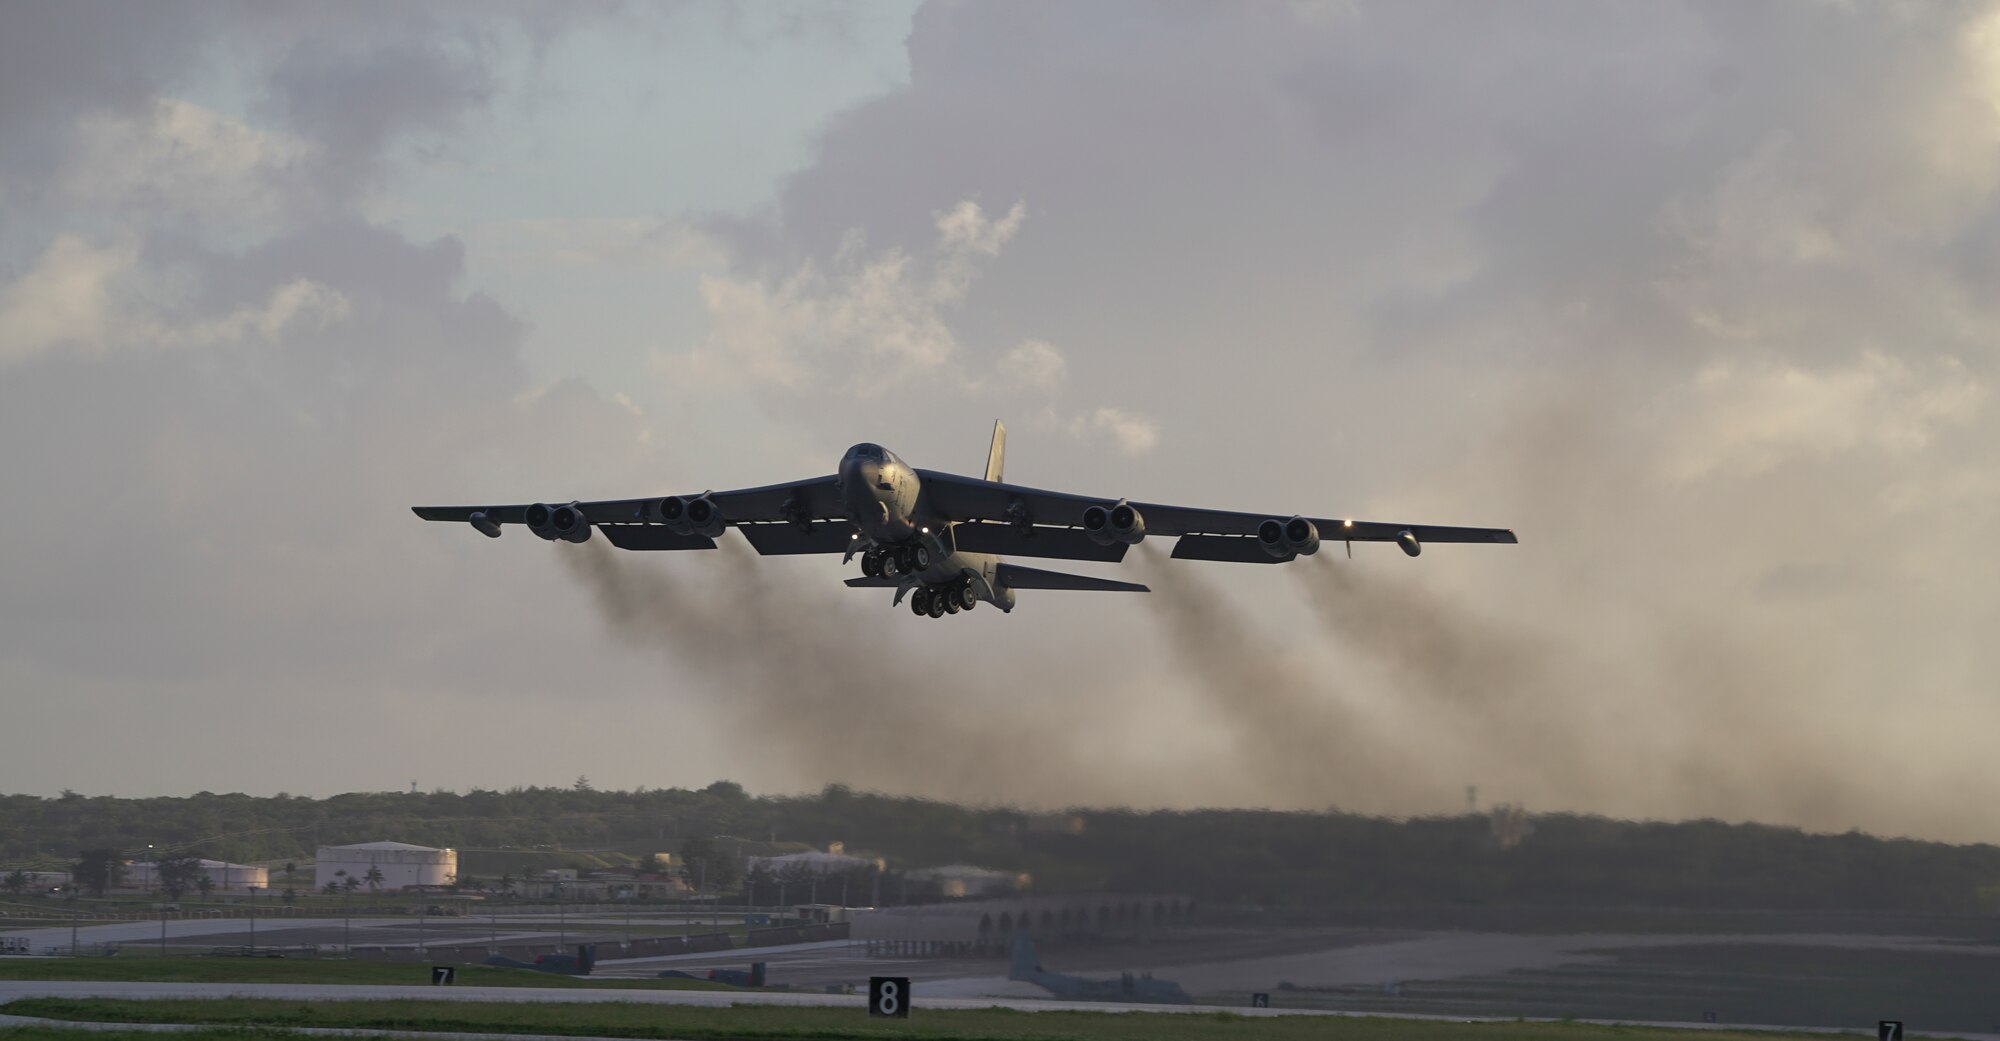 A U.S. Air Force B-52H Stratofortress bomber, deployed from Barksdale Air Force Base, Louisiana, takes off from Andersen Air Force Base, Guam, on a routine training mission May 4, 2018.